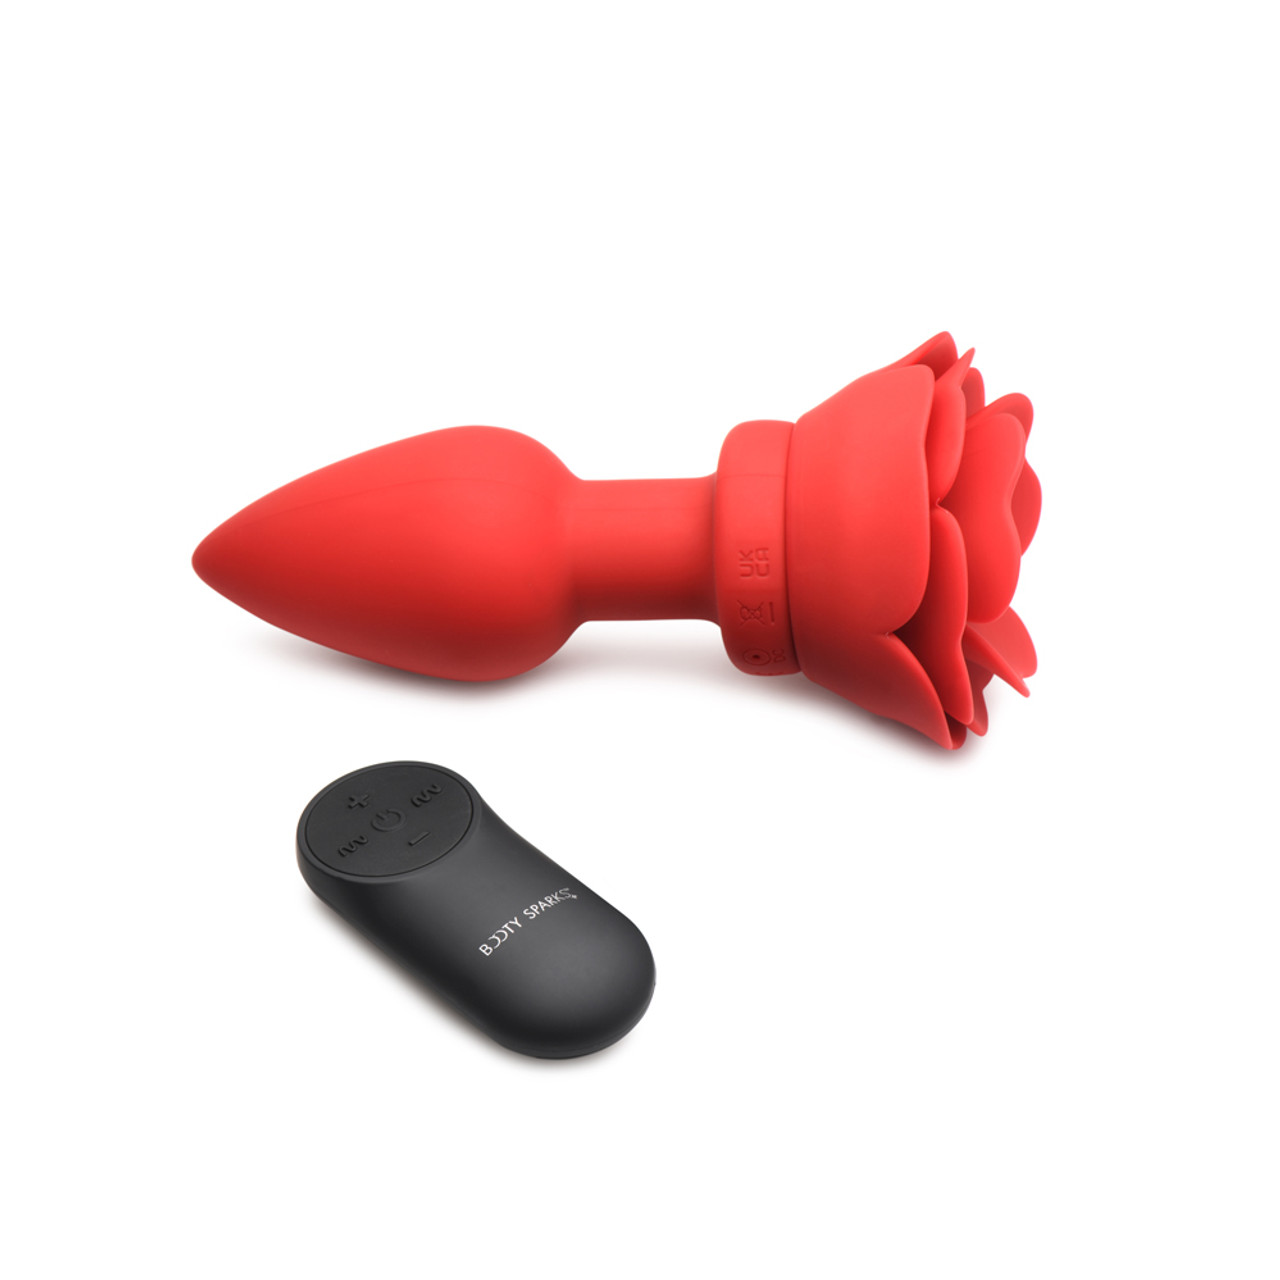 Buy the Booty Sparks Blooming Red Rose 11-Function Remote Control Rechargeable Vibrating Silicone Butt Plug picture image